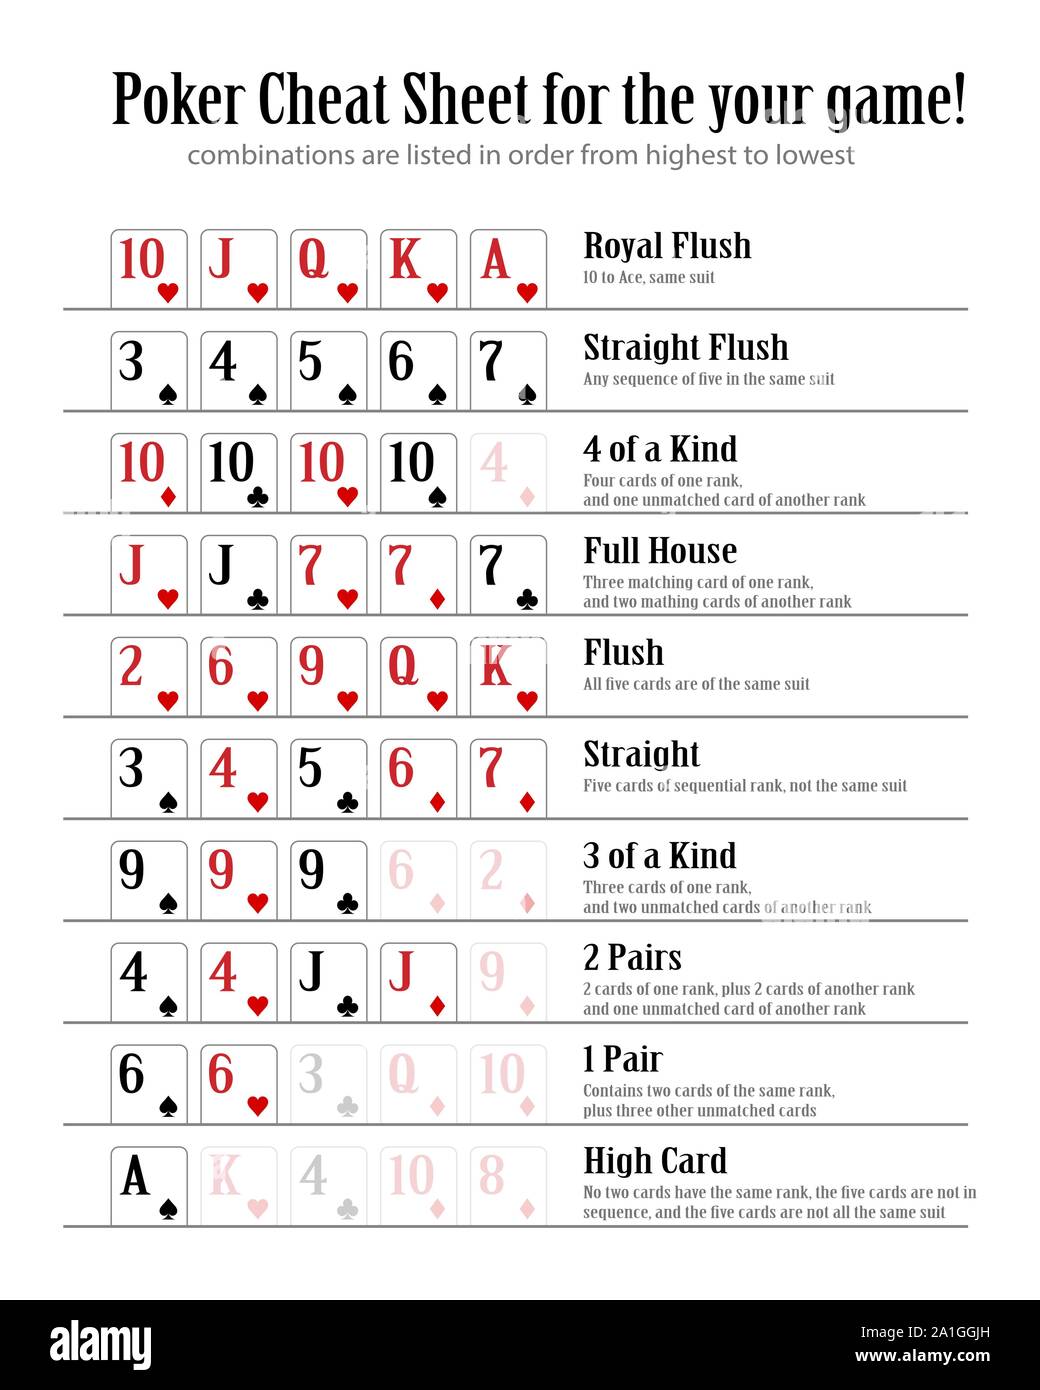 Poker hand guide cards x 10 